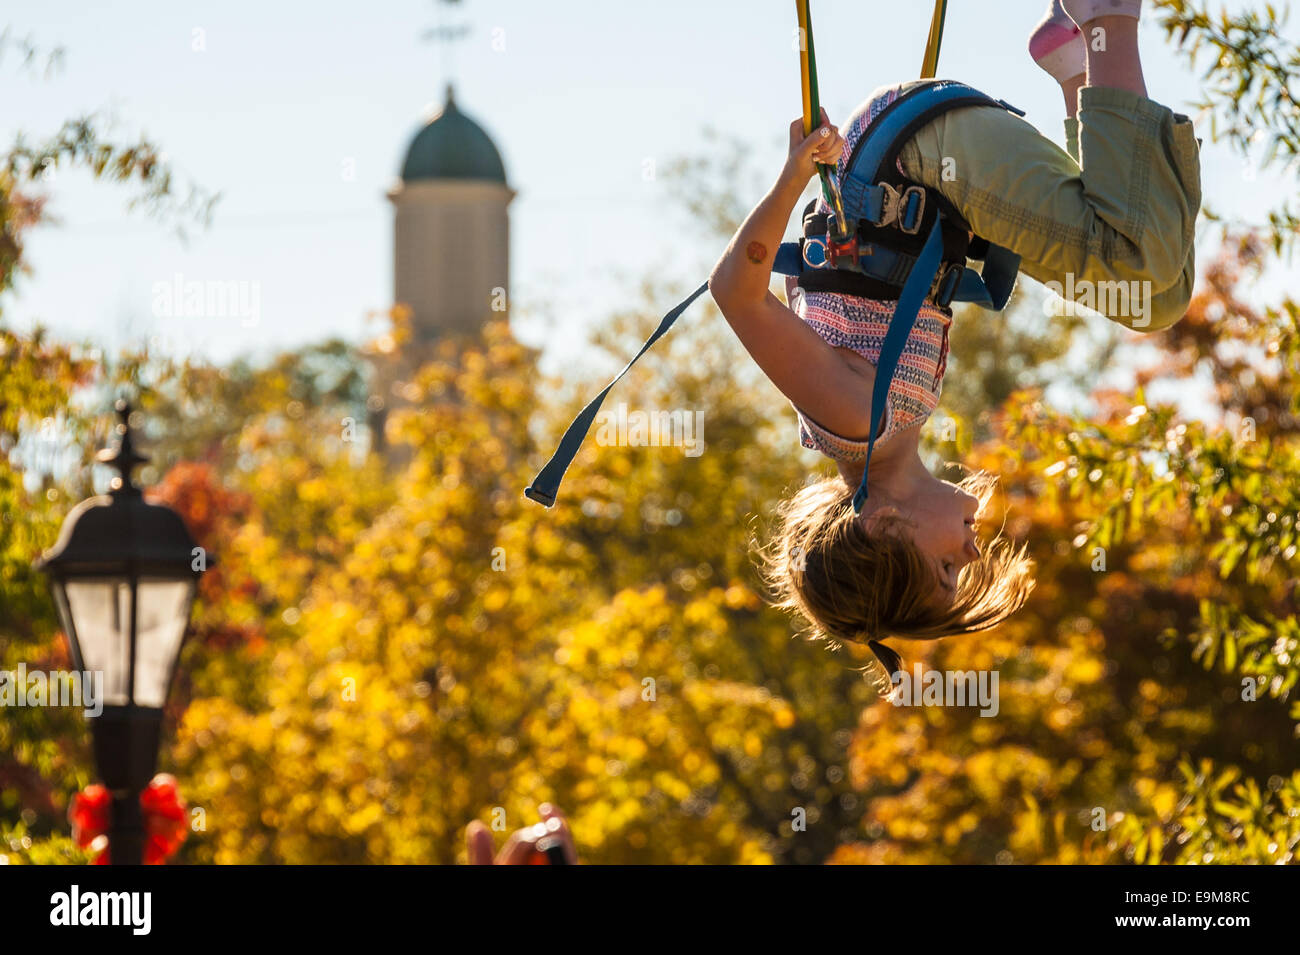 Girl doing somersaults while bouncing on a bungee jump at the Snellville Fall Festival near Atlanta, Georgia, USA. Stock Photo